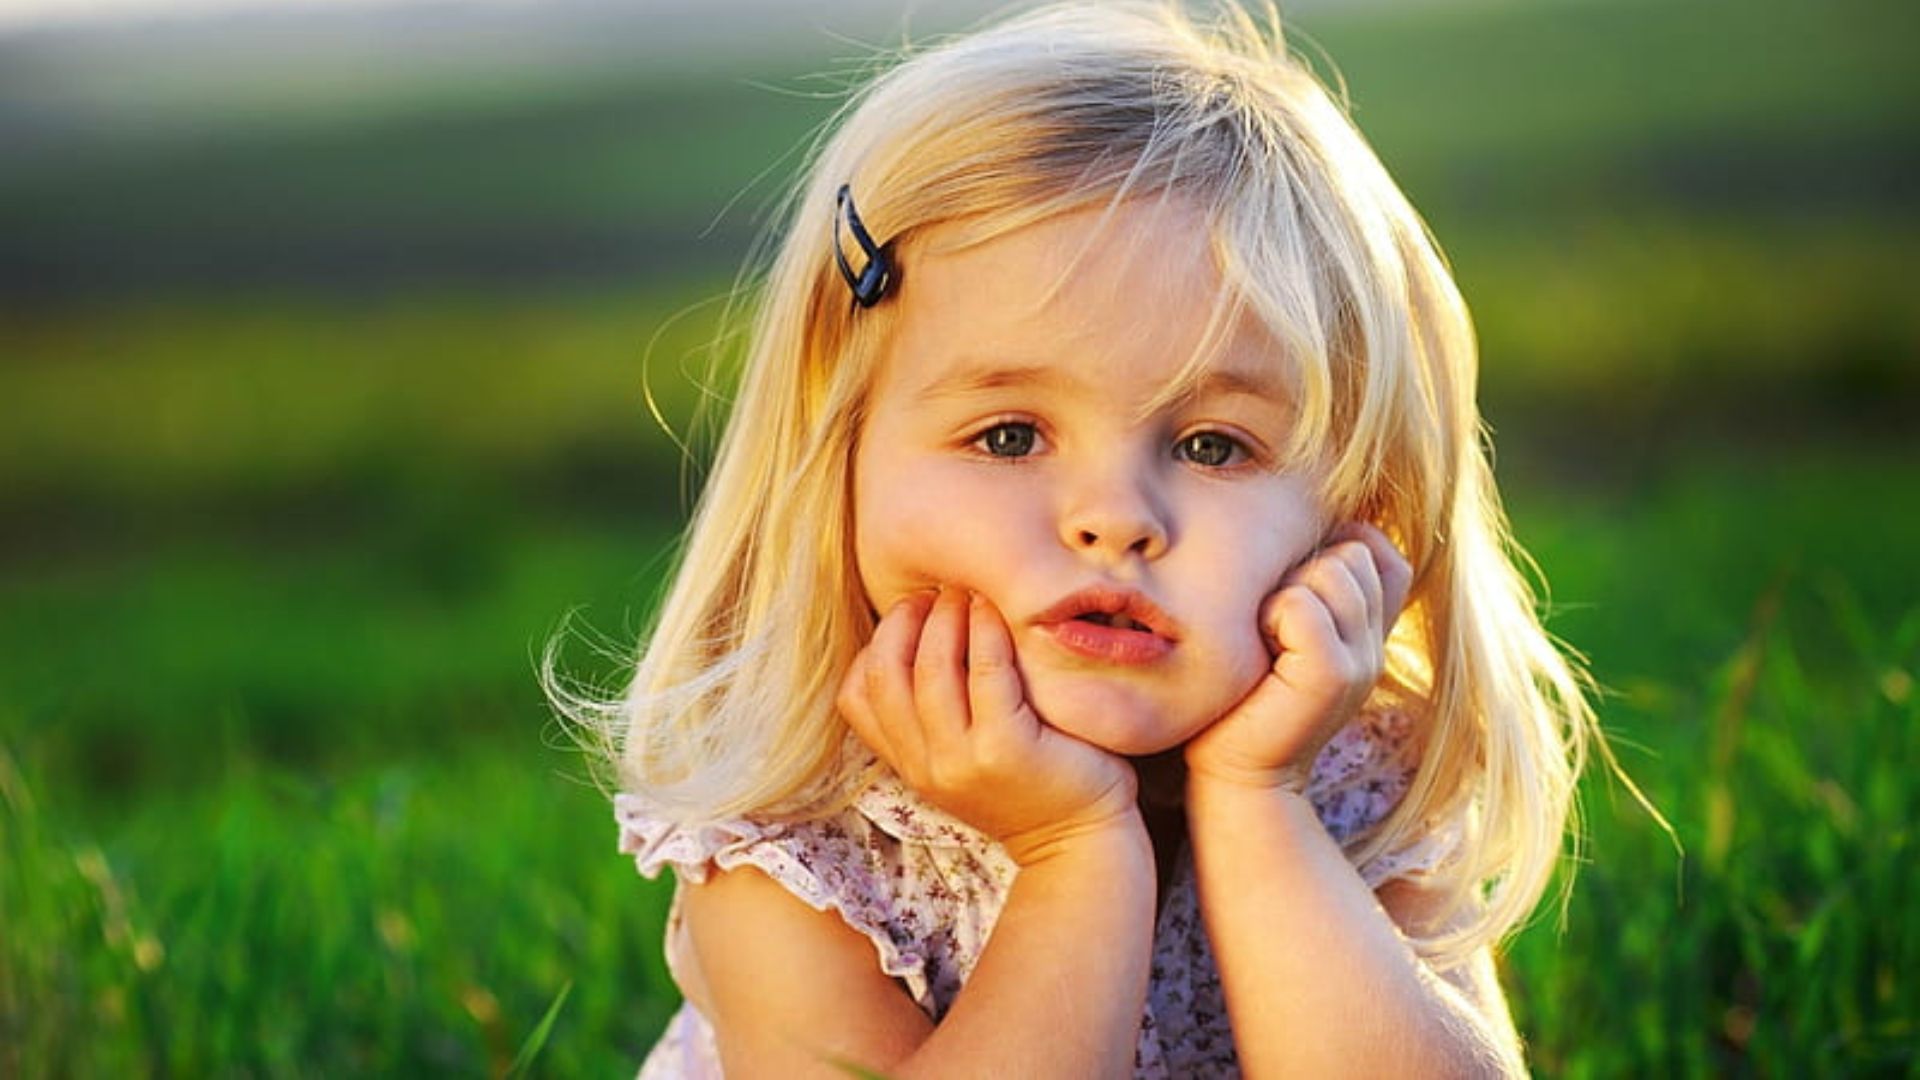 Cute Baby Background Photos